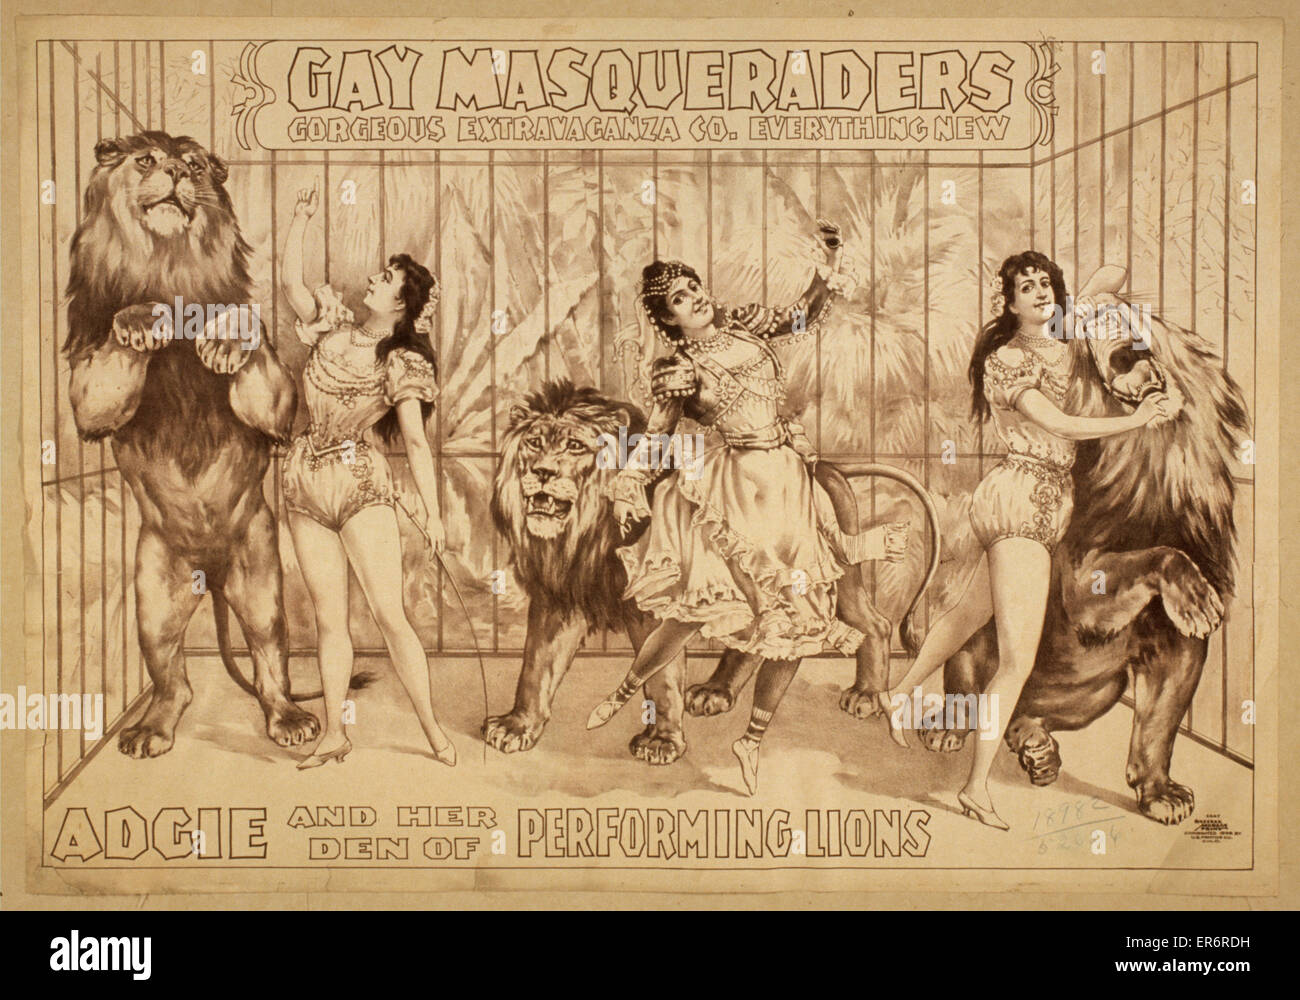 Gay Masqueraders Gorgeous Extravaganza Co. everything new Stock Photo